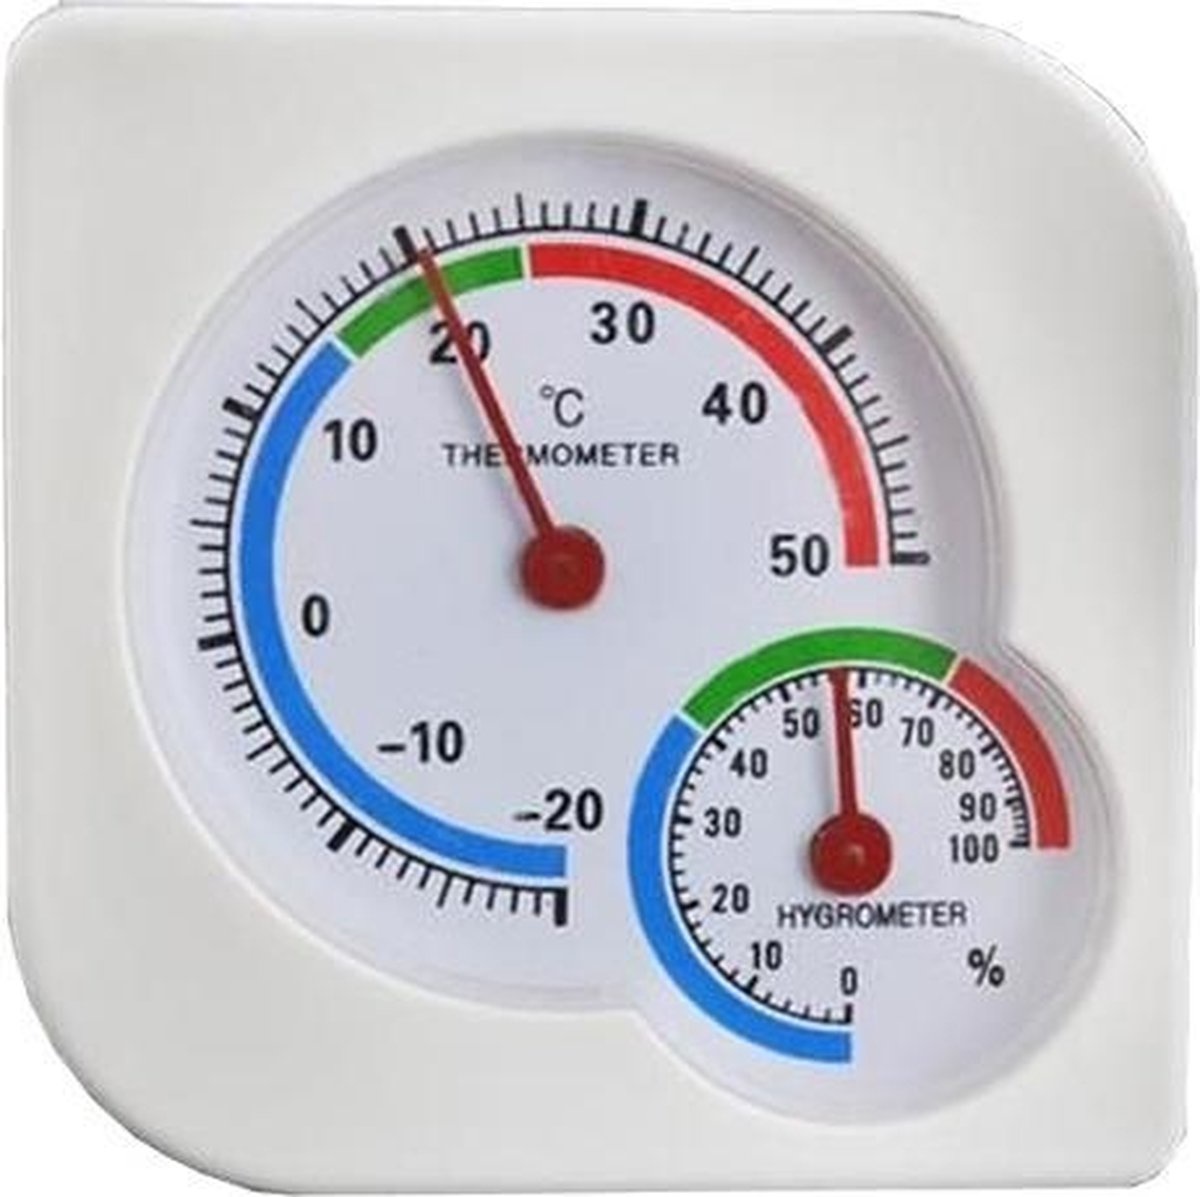 https://cdn.webshopapp.com/shops/38765/files/409422478/thermometer-hygrometer-analog-indoor-and-outdoor-w.jpg